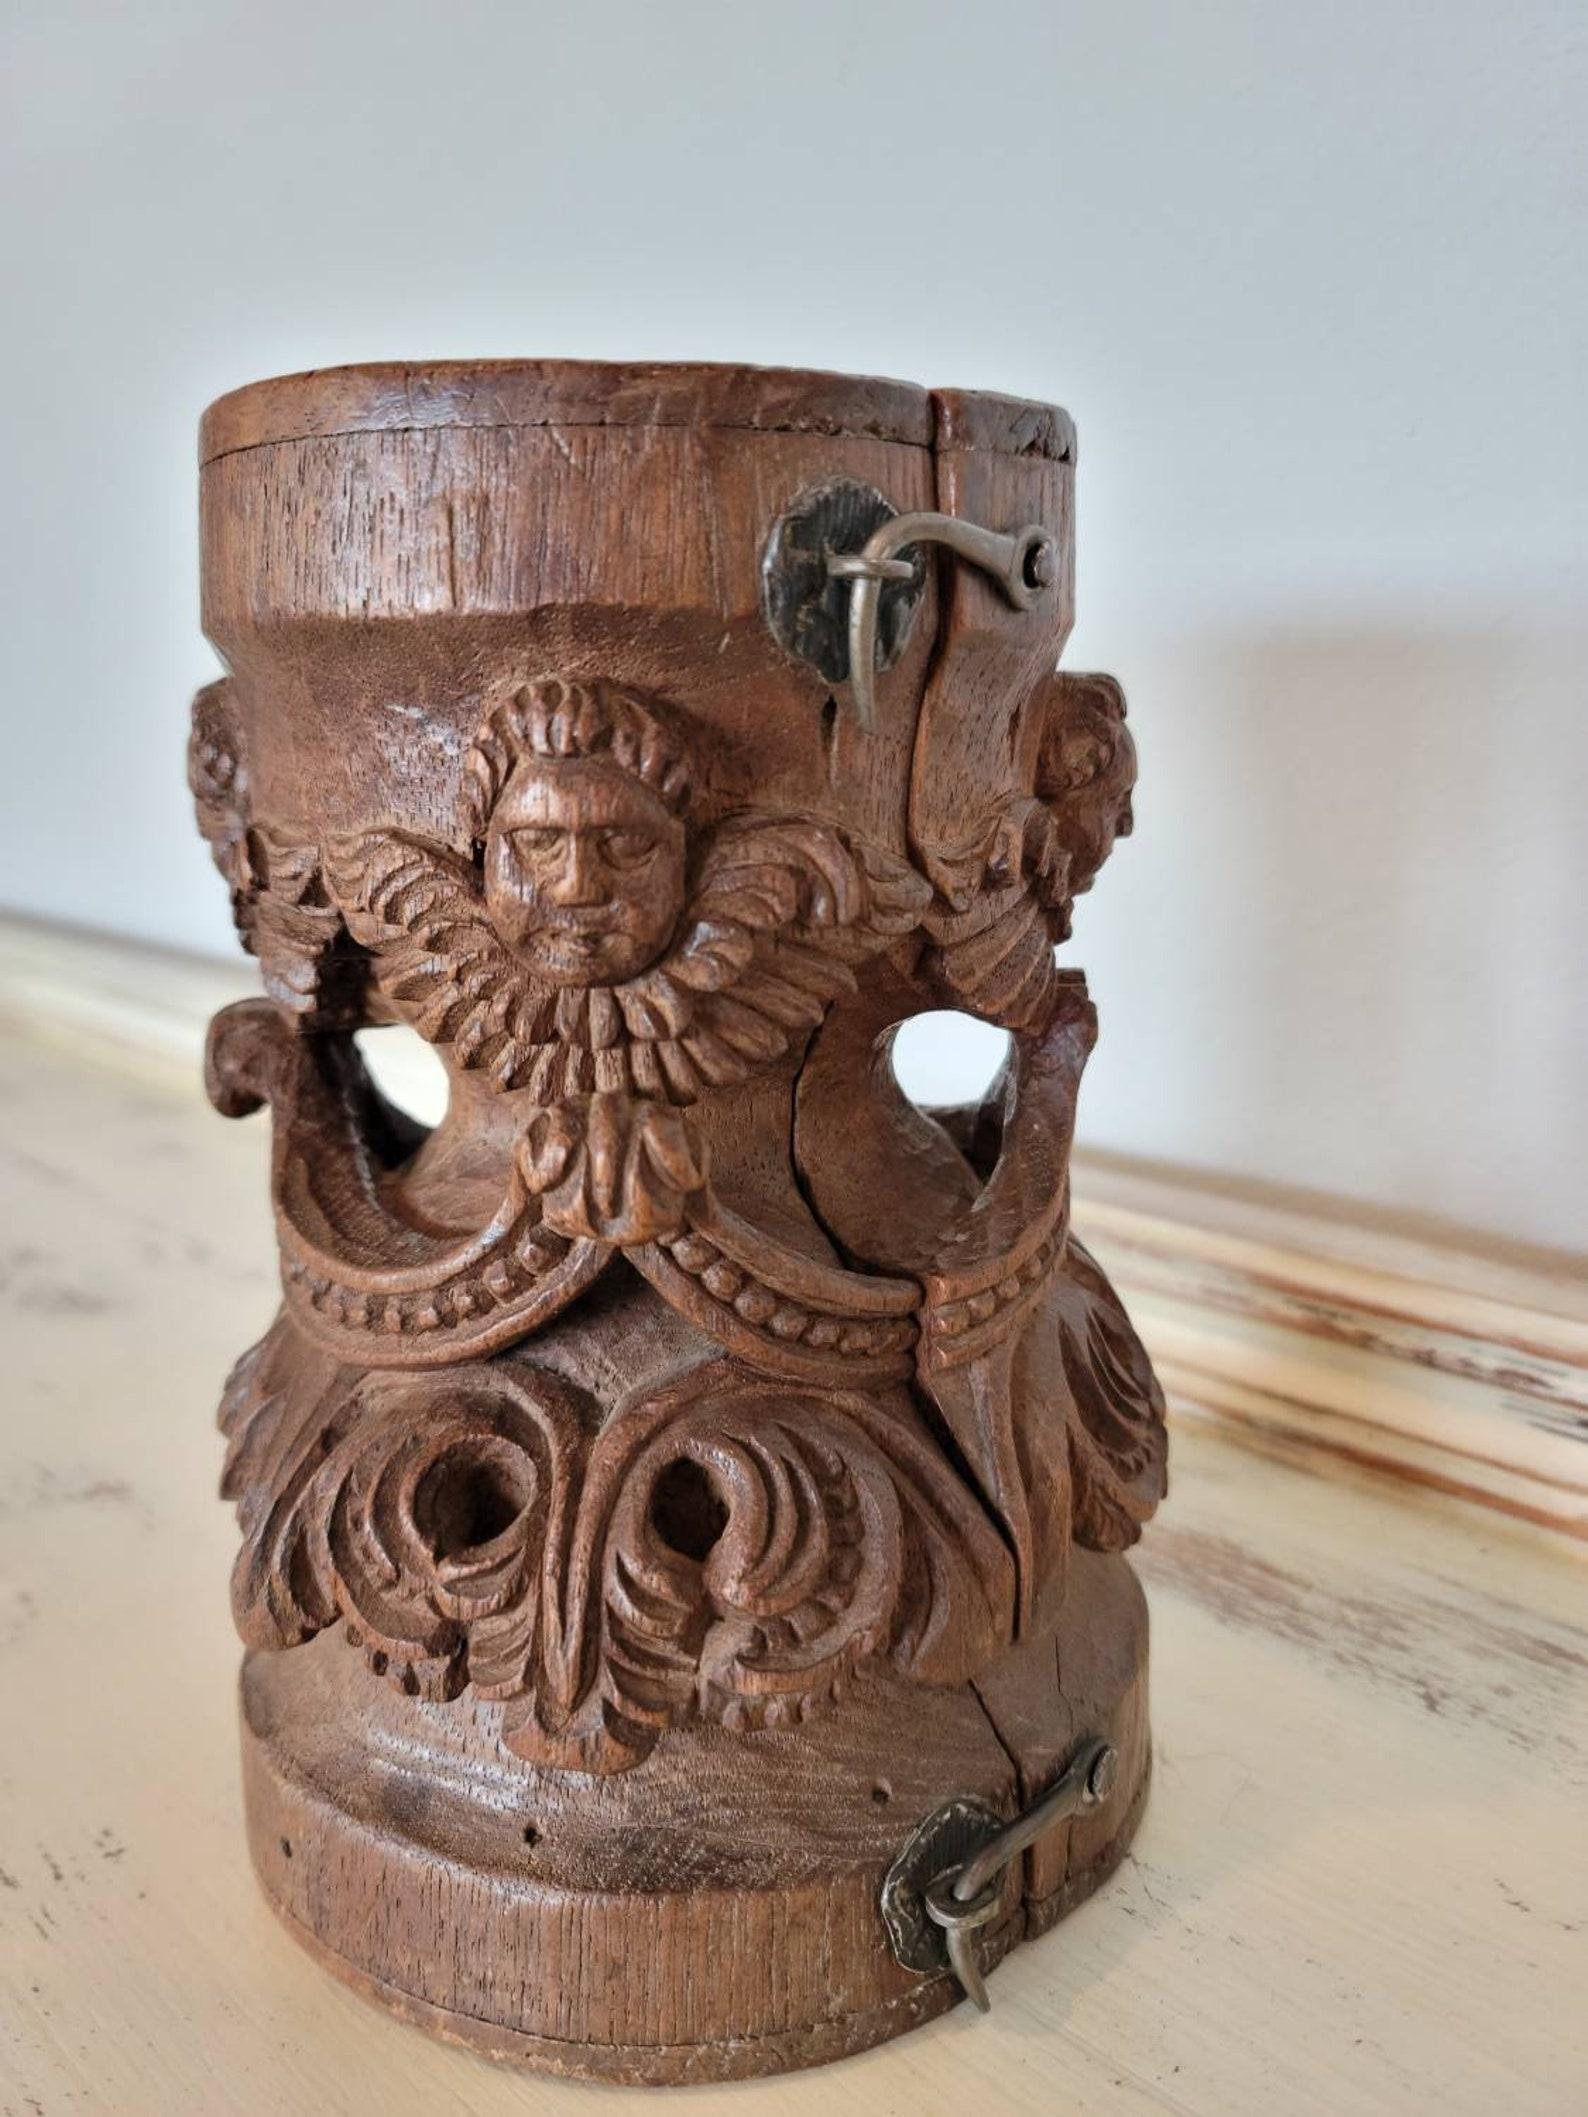 A scarce antique Continental Baroque hand carved Eucharistic communion chalice and paten sacred vessel case.

Born in the first half of the 19th century, most likely Italian or French origin, the intricately detailed exterior features high relief